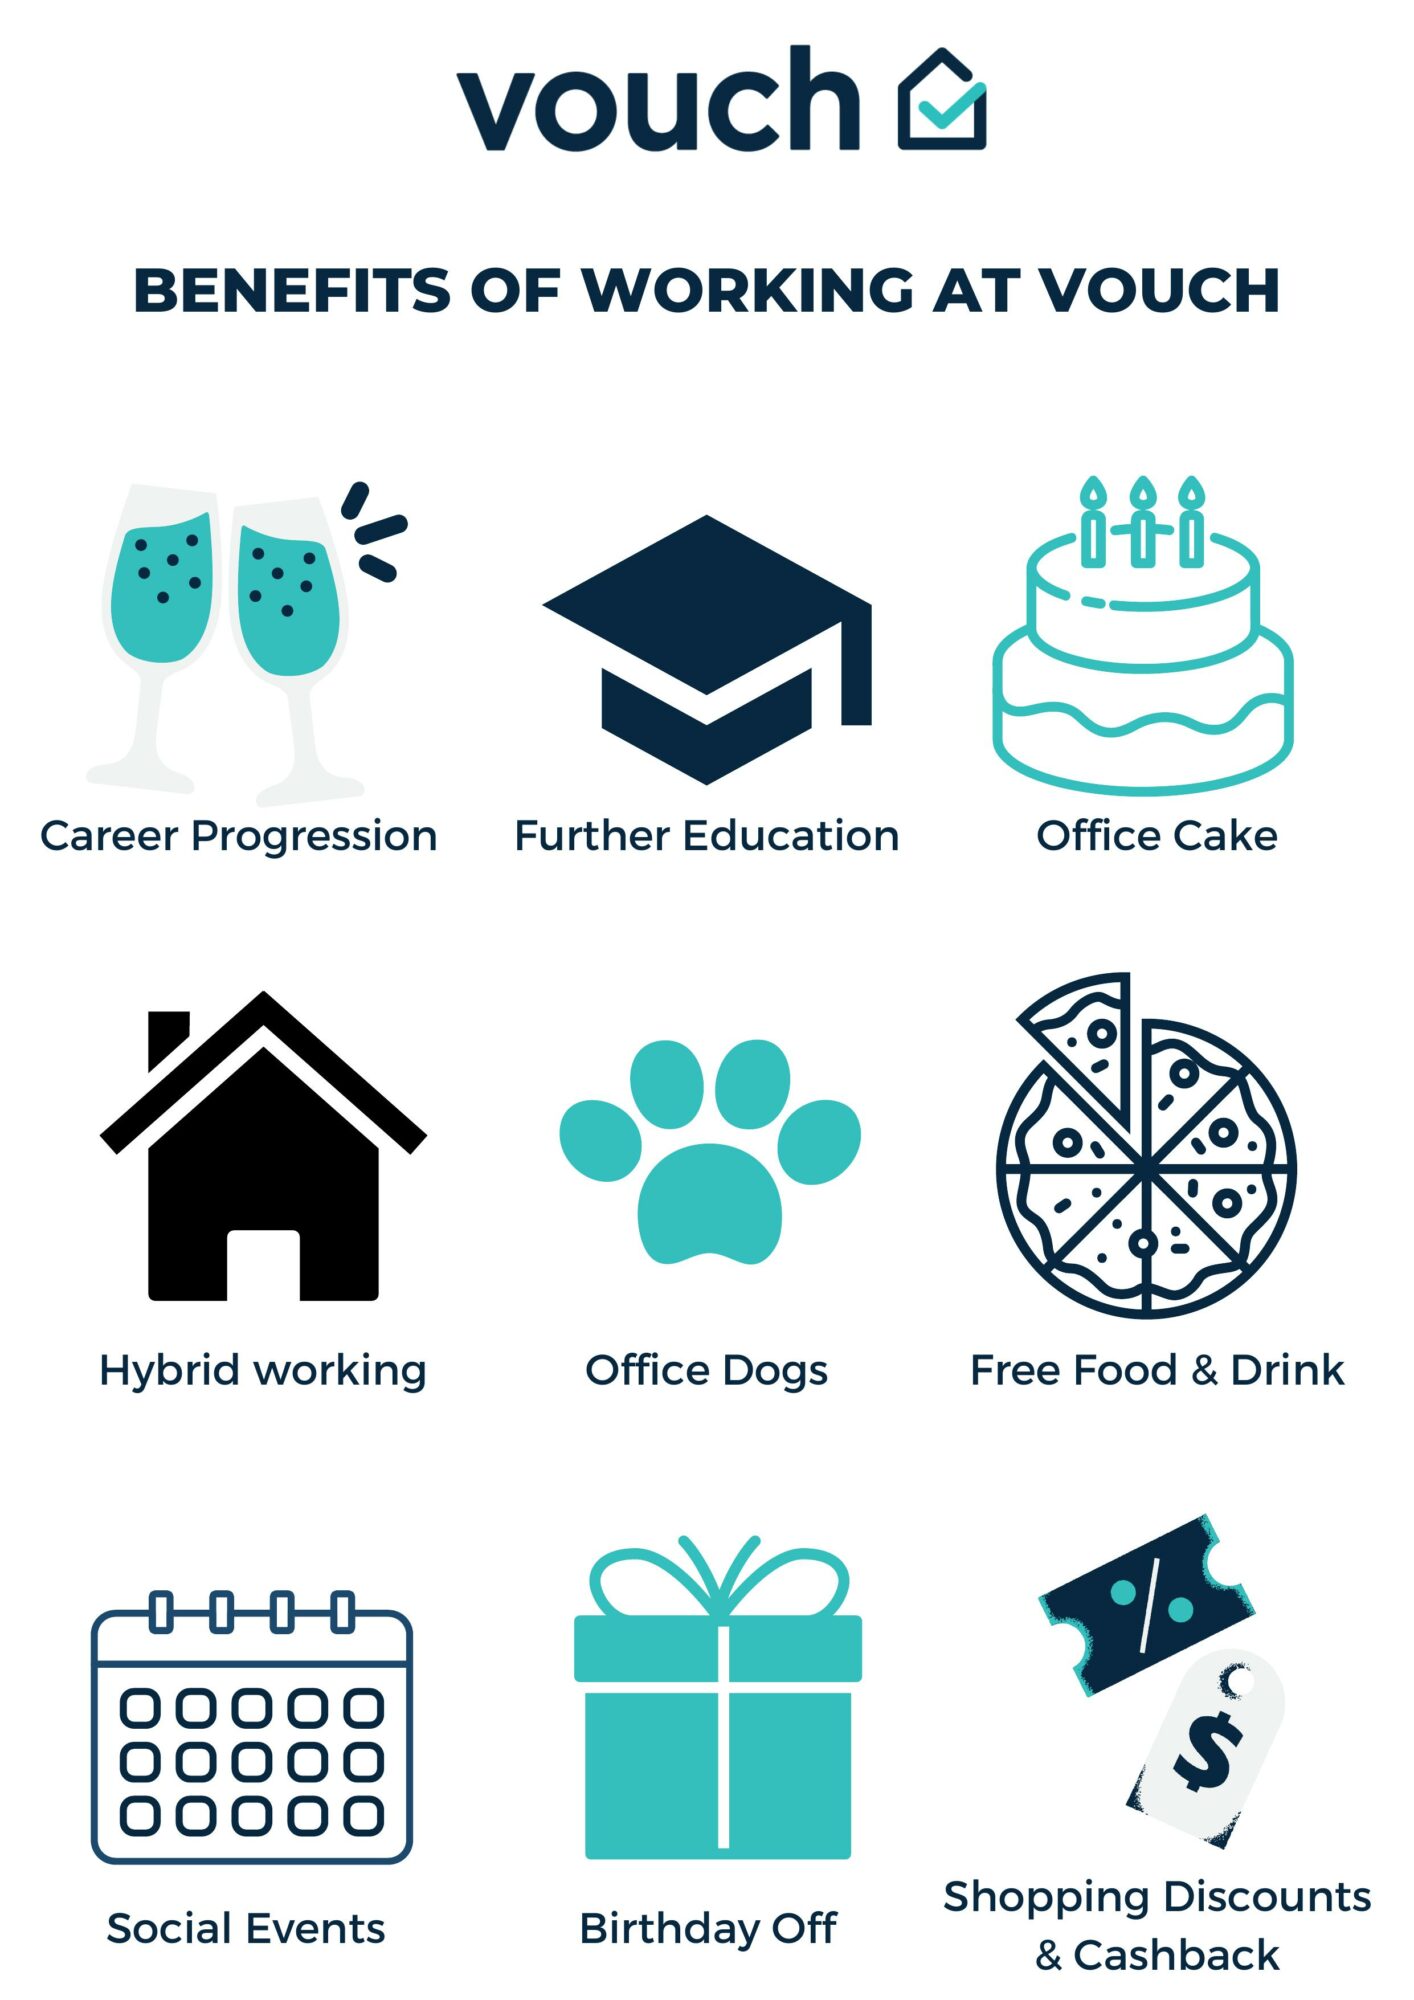 BENEFITS-OF-WORKING-AT-VOUCH-v2-1